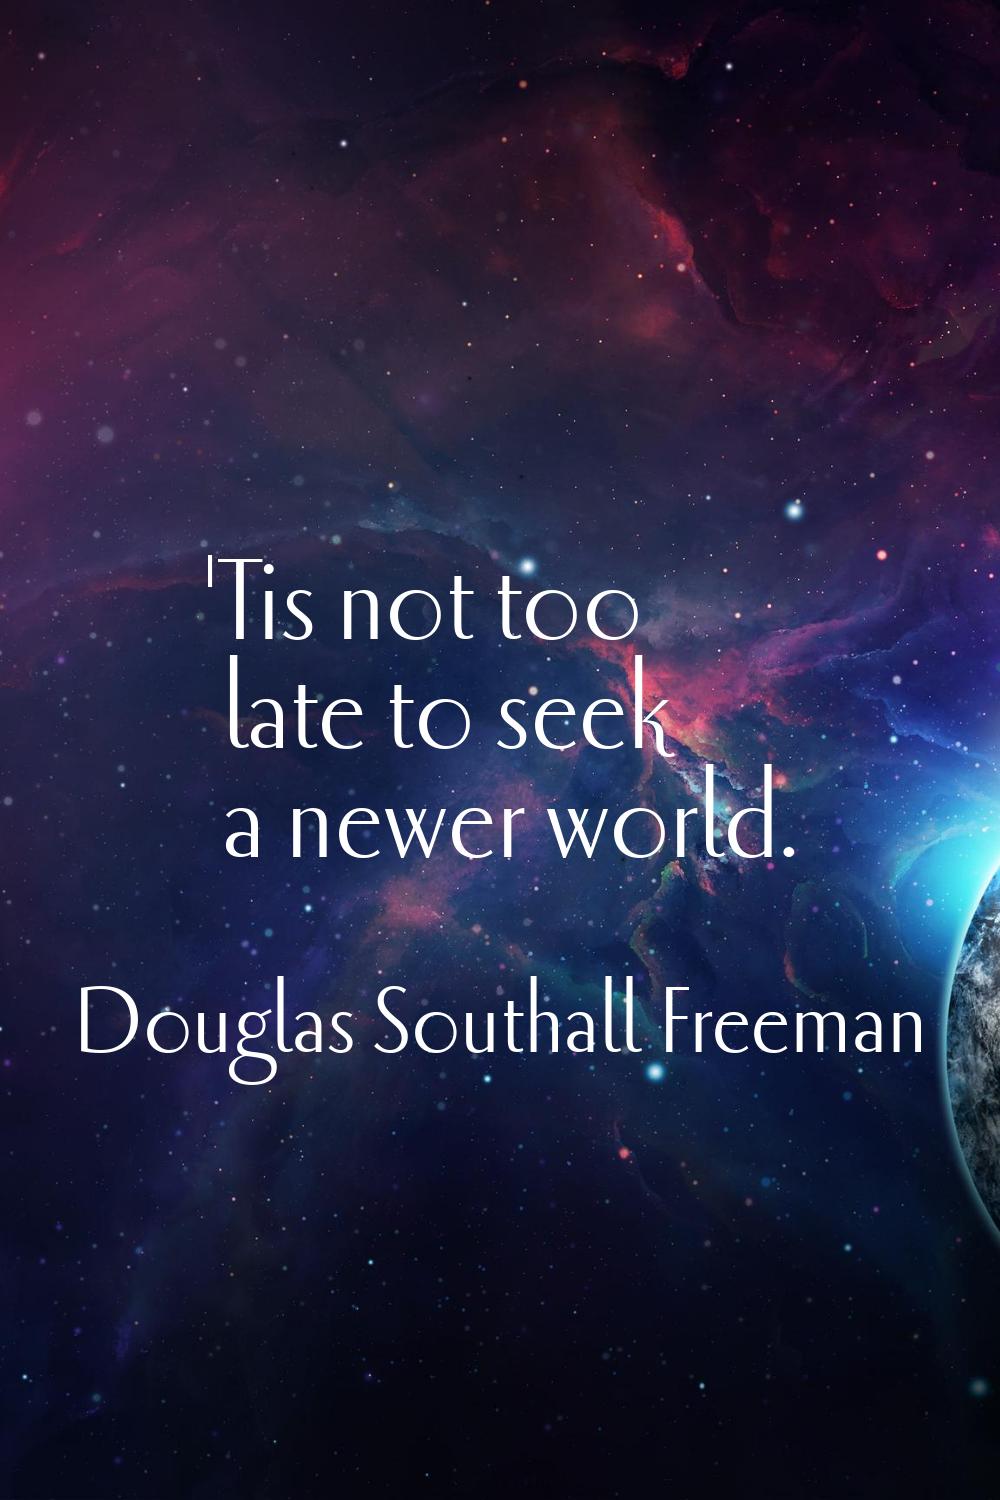 'Tis not too late to seek a newer world.